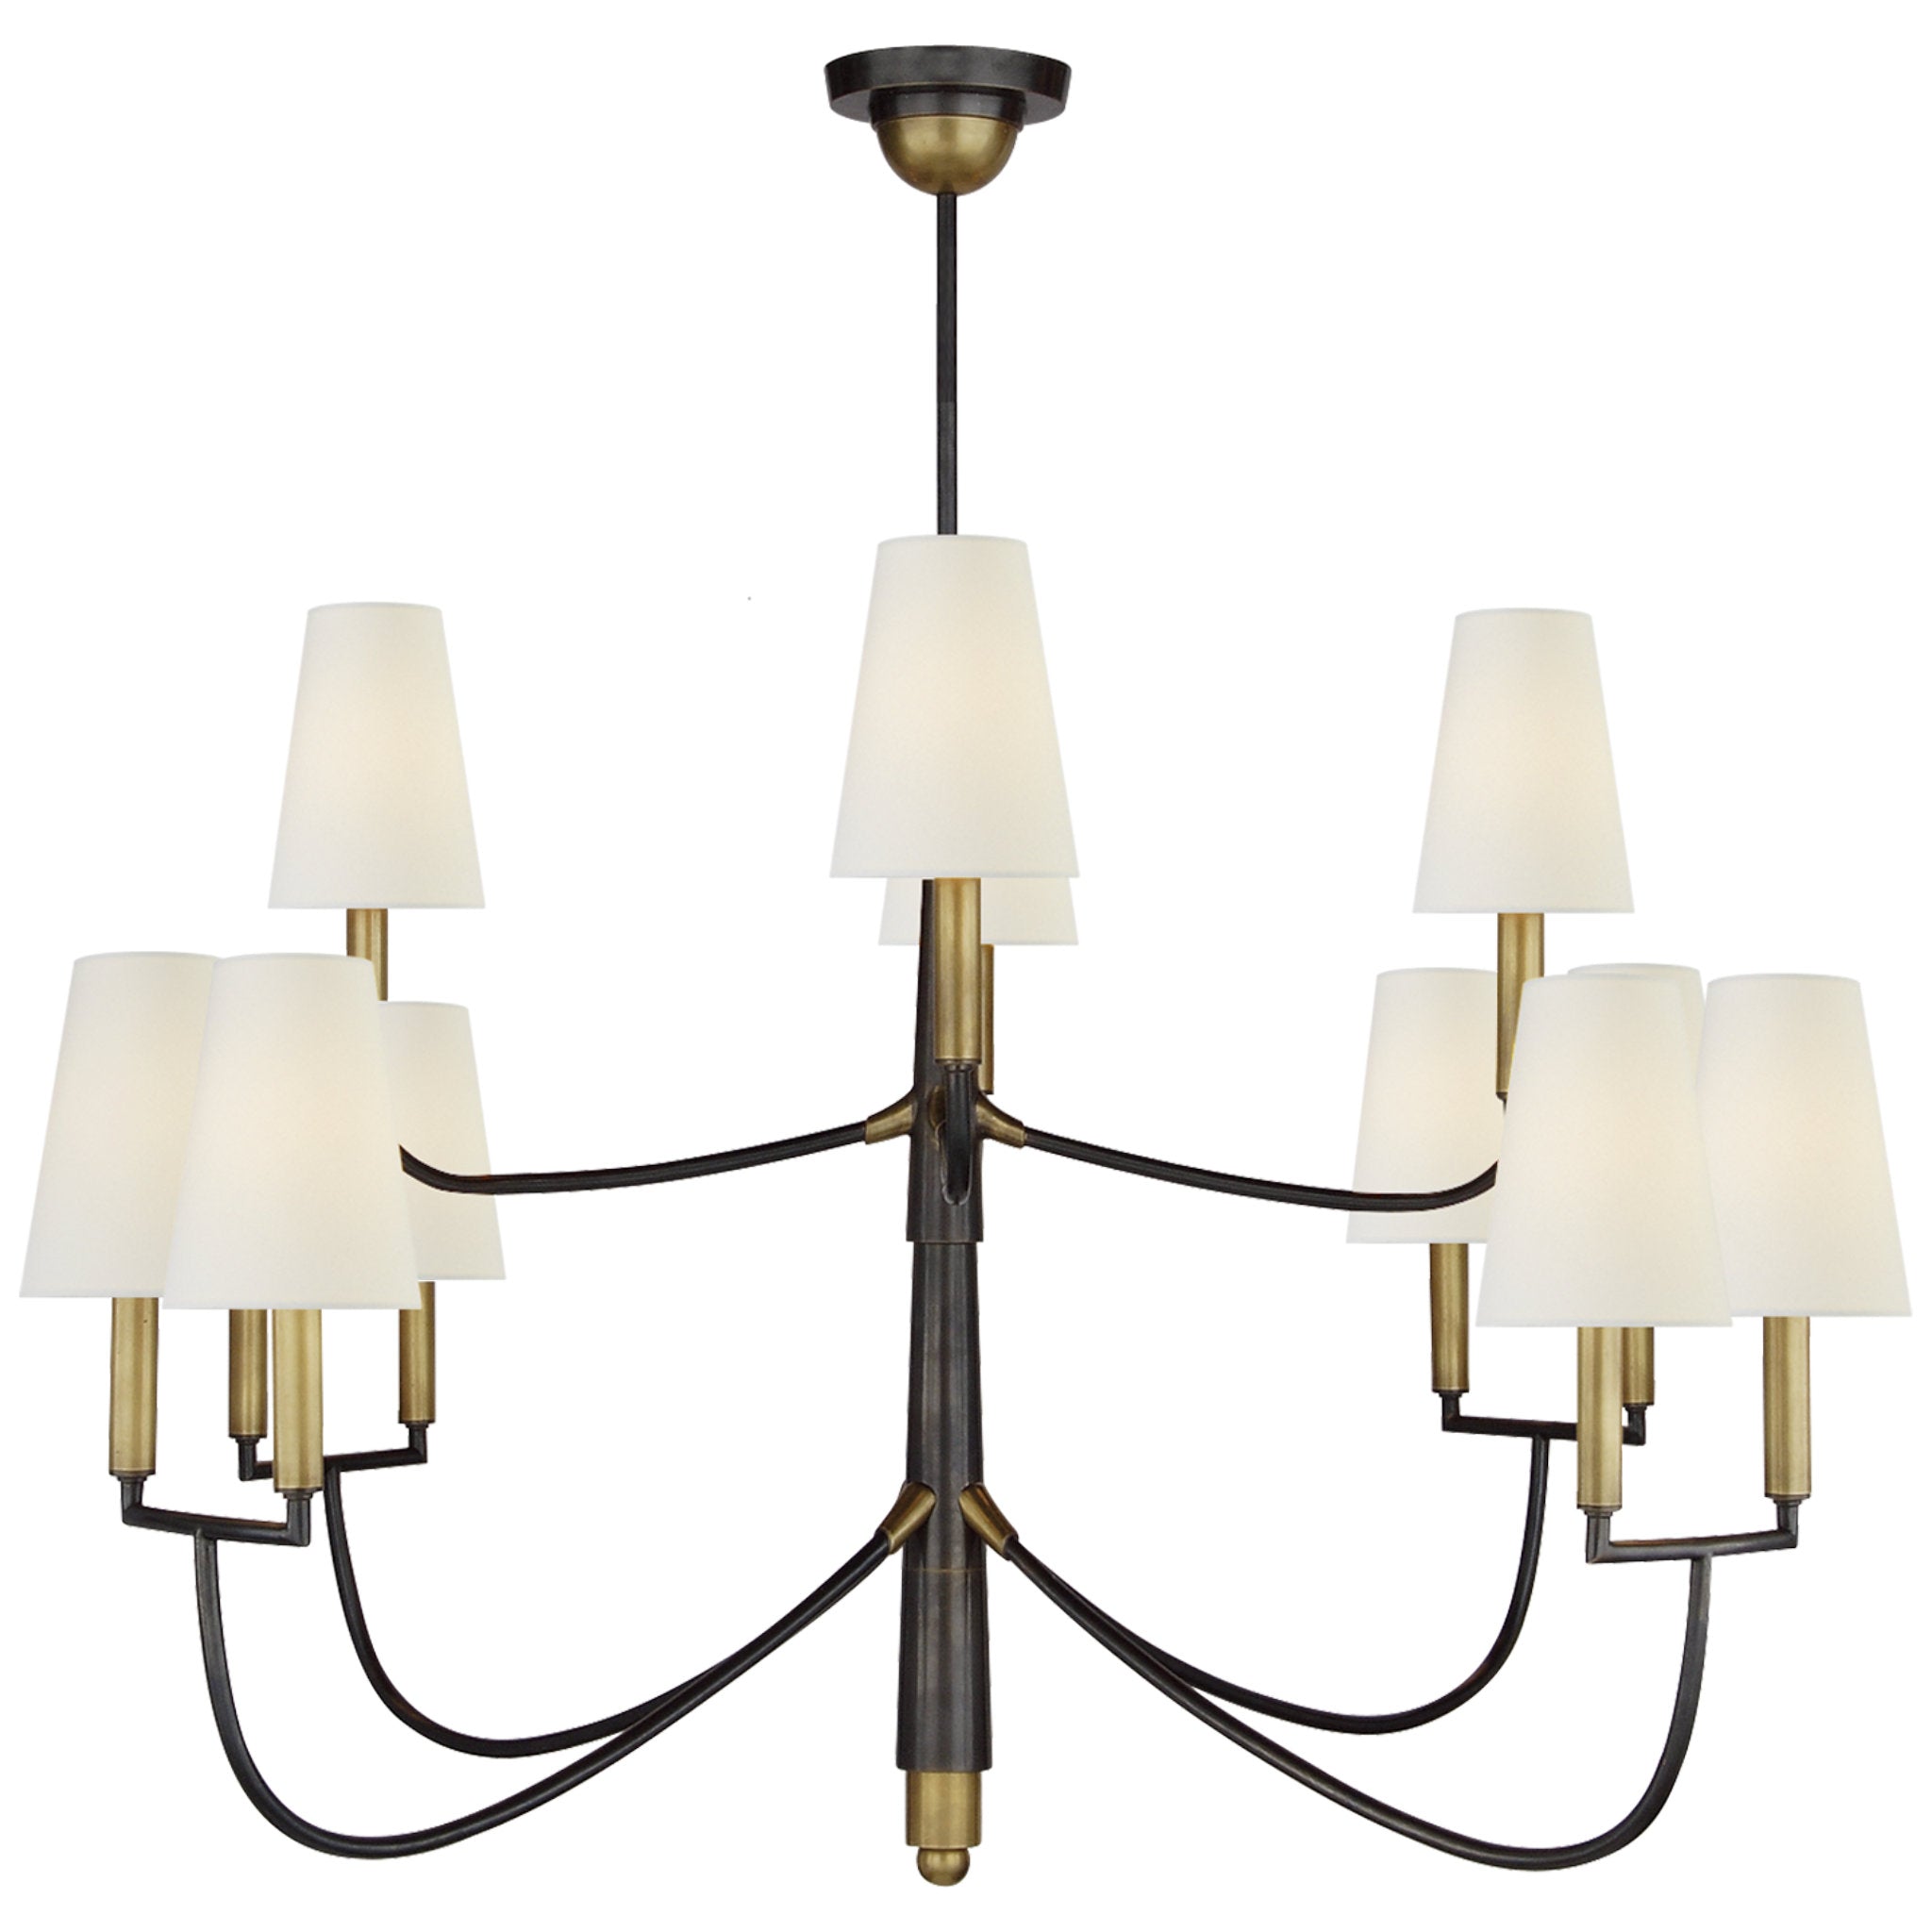 Thomas OBrien Alpha Chandelier in Antique Brass by Visual Comfort Signature  at Destination Lighting